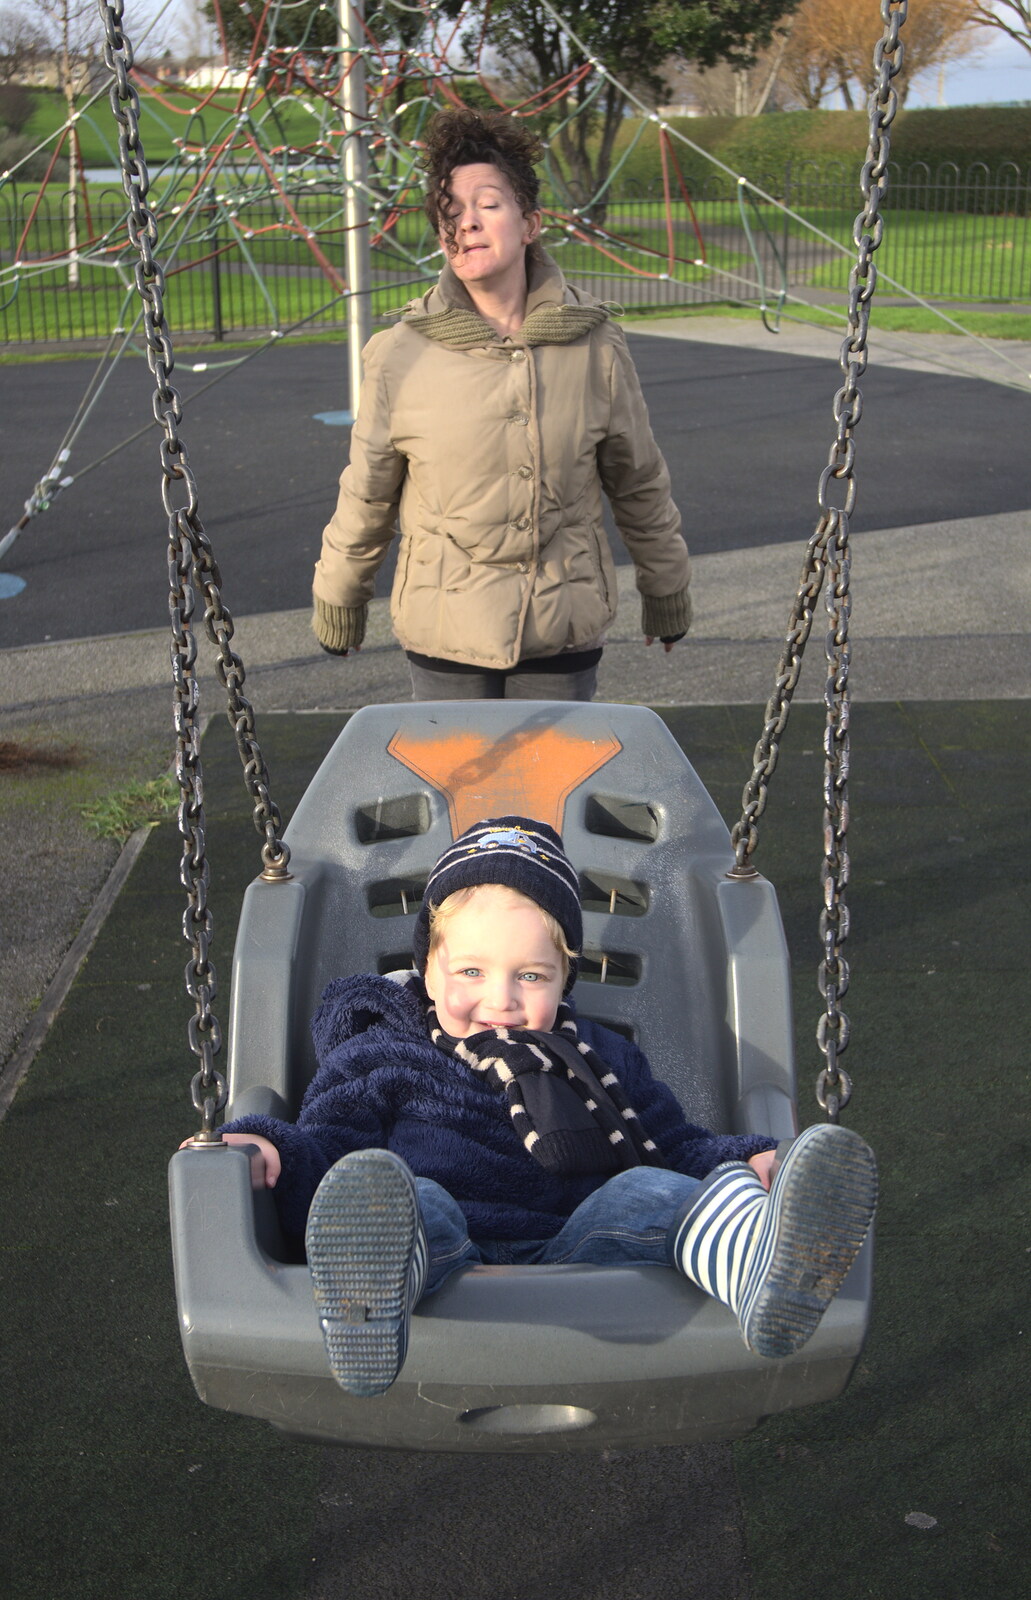 Evelyn pushes Fred on a swing from A Morning in Blackrock, County Dublin, Ireland - 8th January 2012